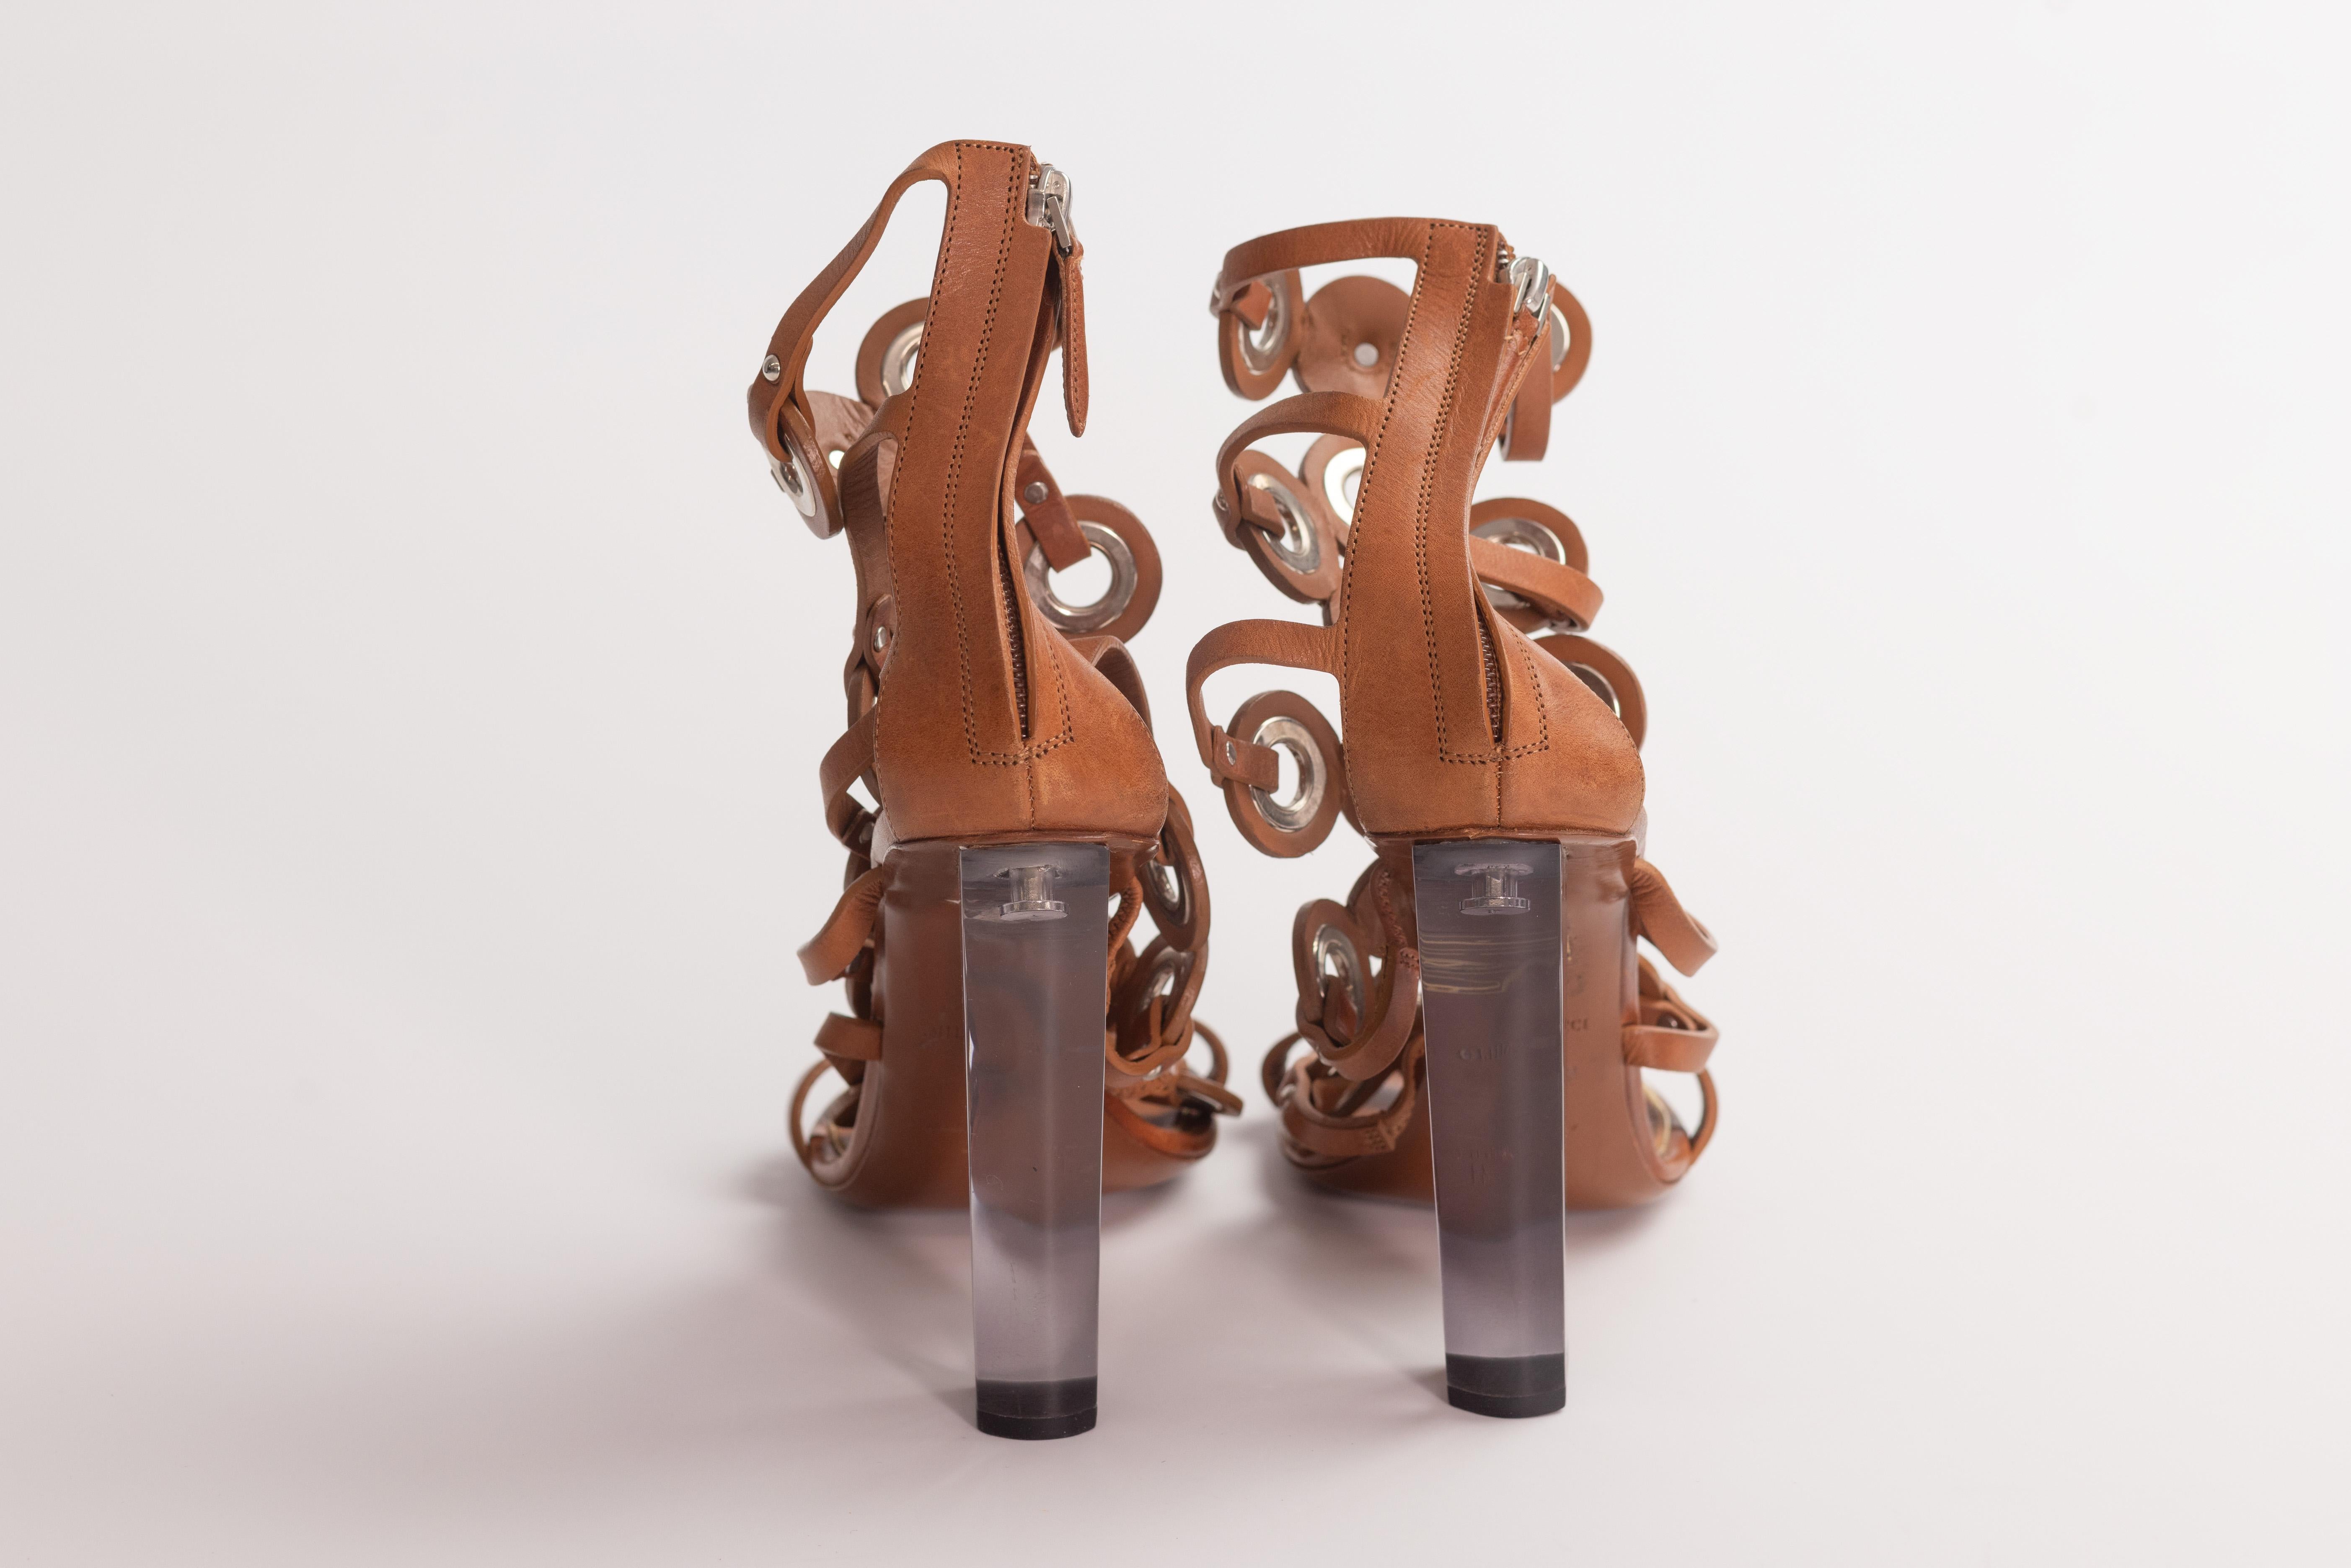 Emilio Pucci Gladiator Sandal Heels (EU 41) In Good Condition For Sale In Montreal, Quebec